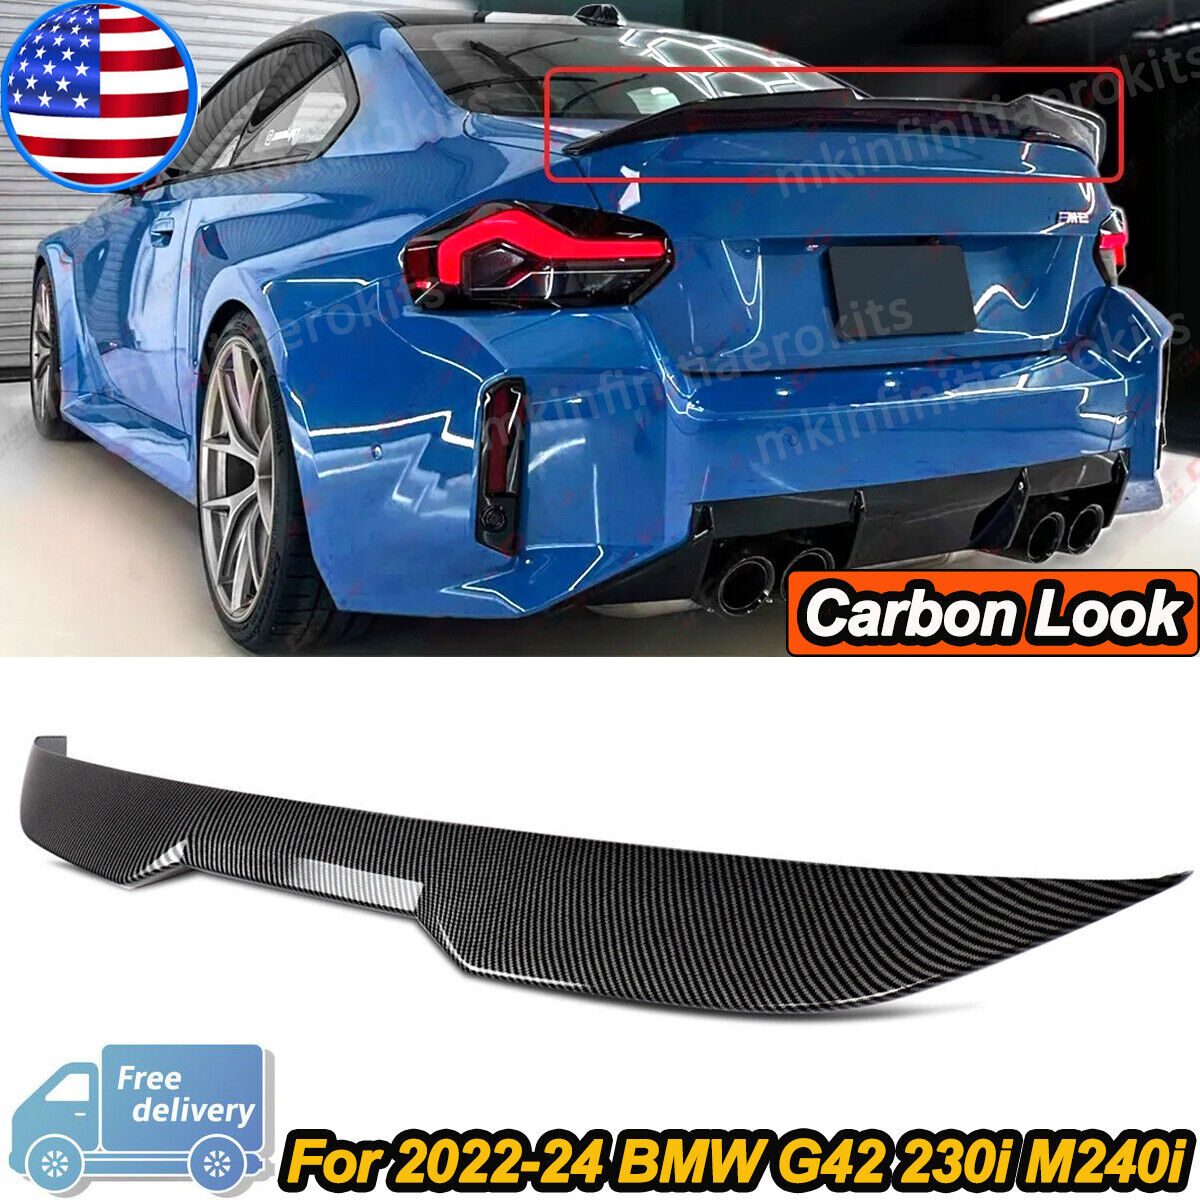 PSM STYLE CARBON COLOR TRUNK SPOILER FOR 2022-2024 BMW G42 2 SERIES M240i G87 M2